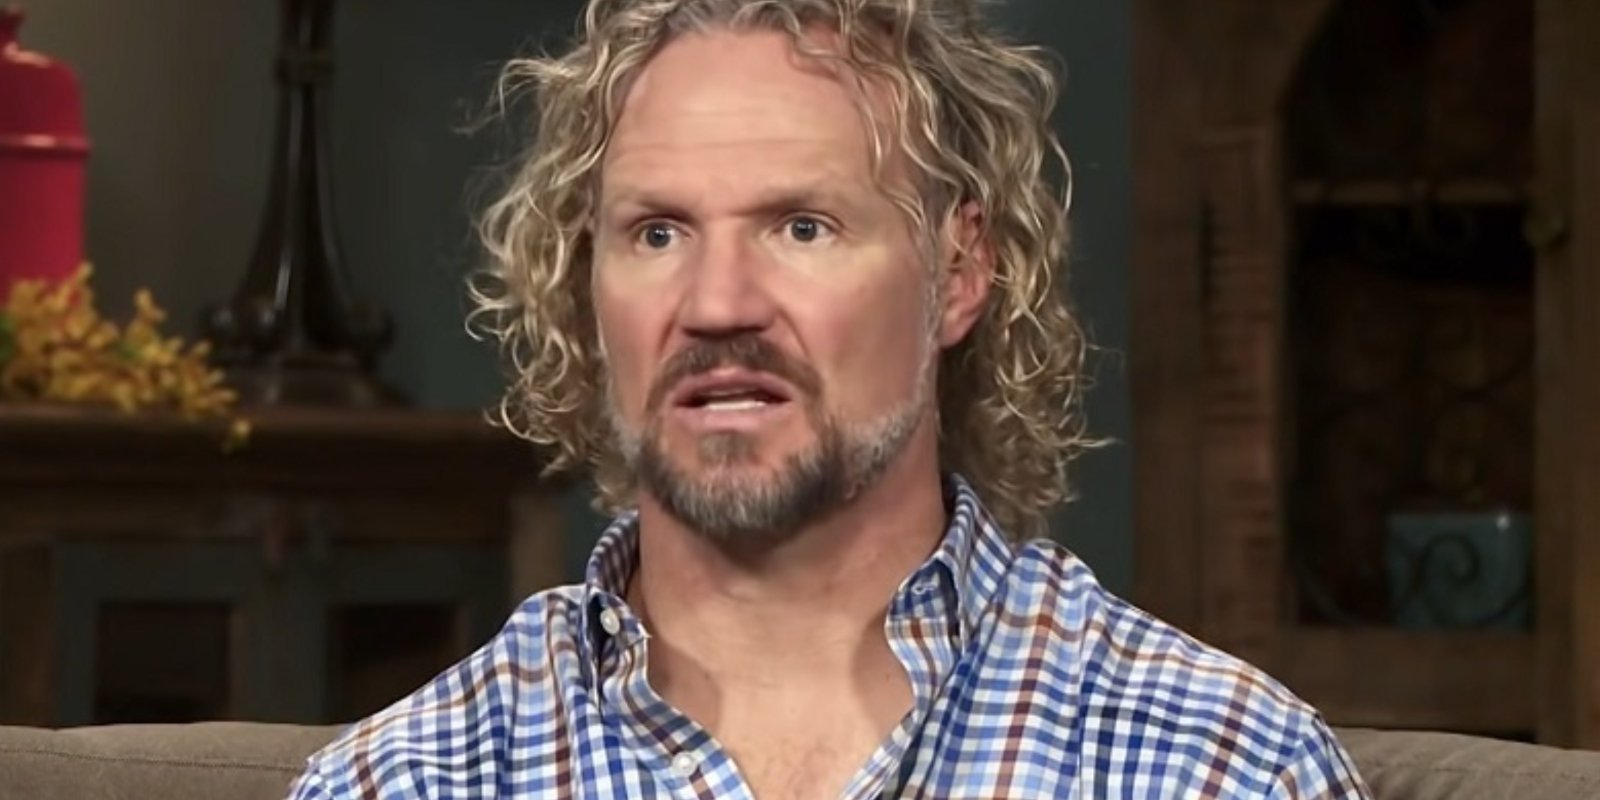 Kody Brown is seated during a confessional for season 17 of 'Sister Wives.'